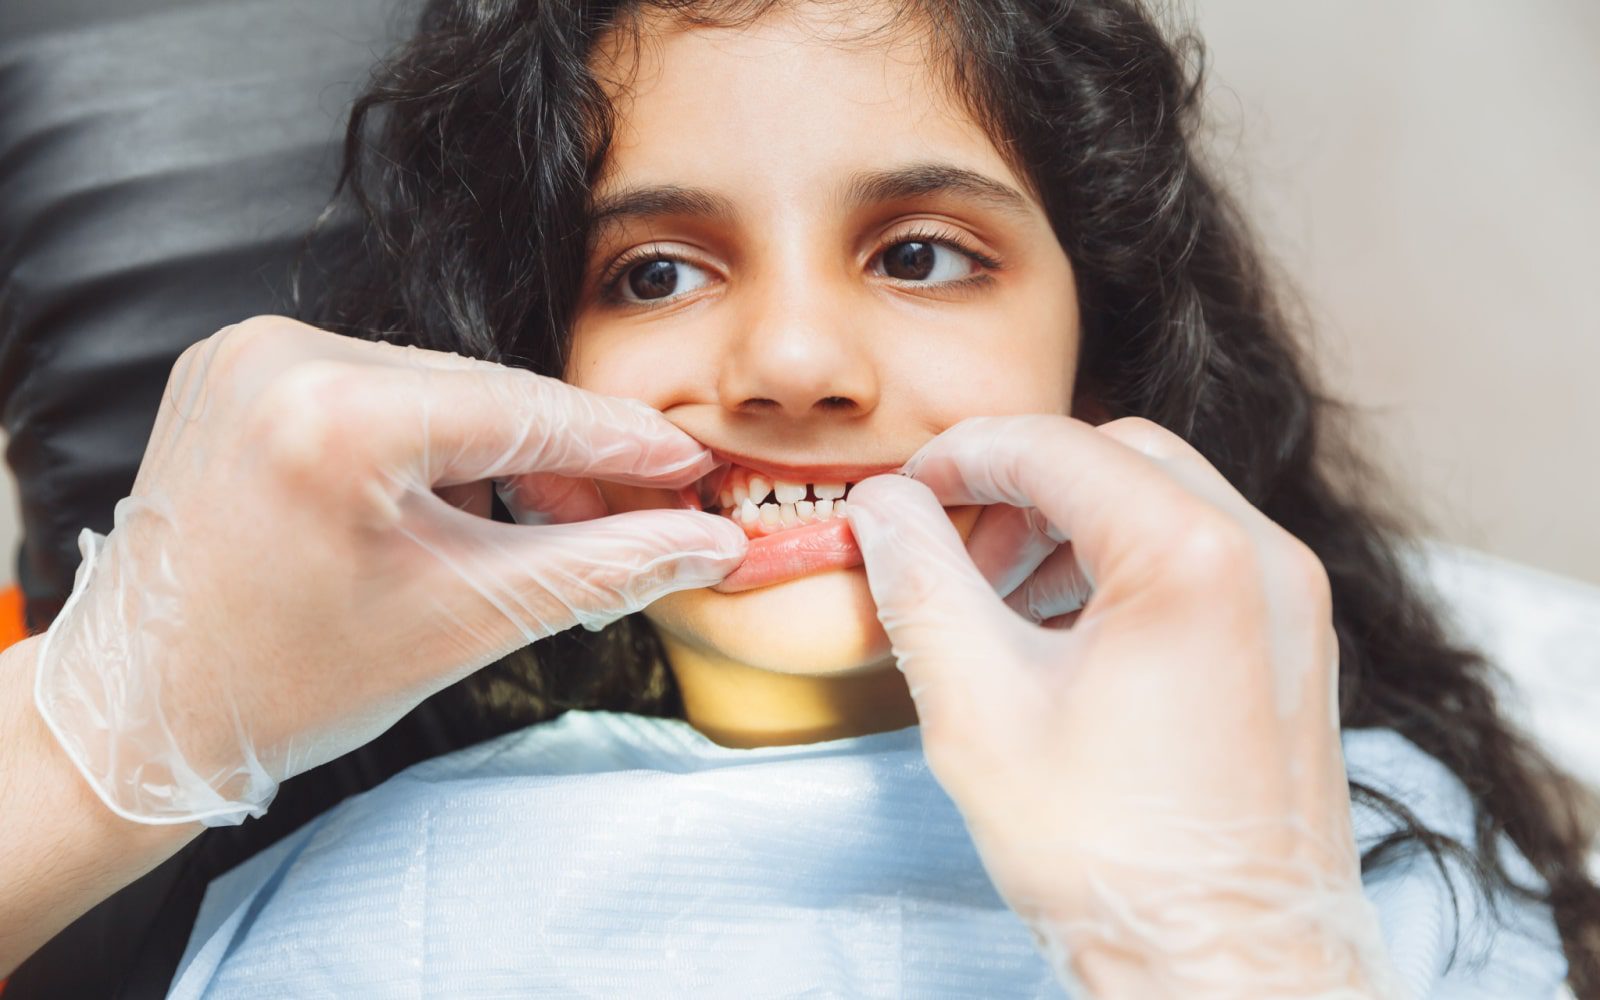 Child Getting Dental Inspection From Dentist